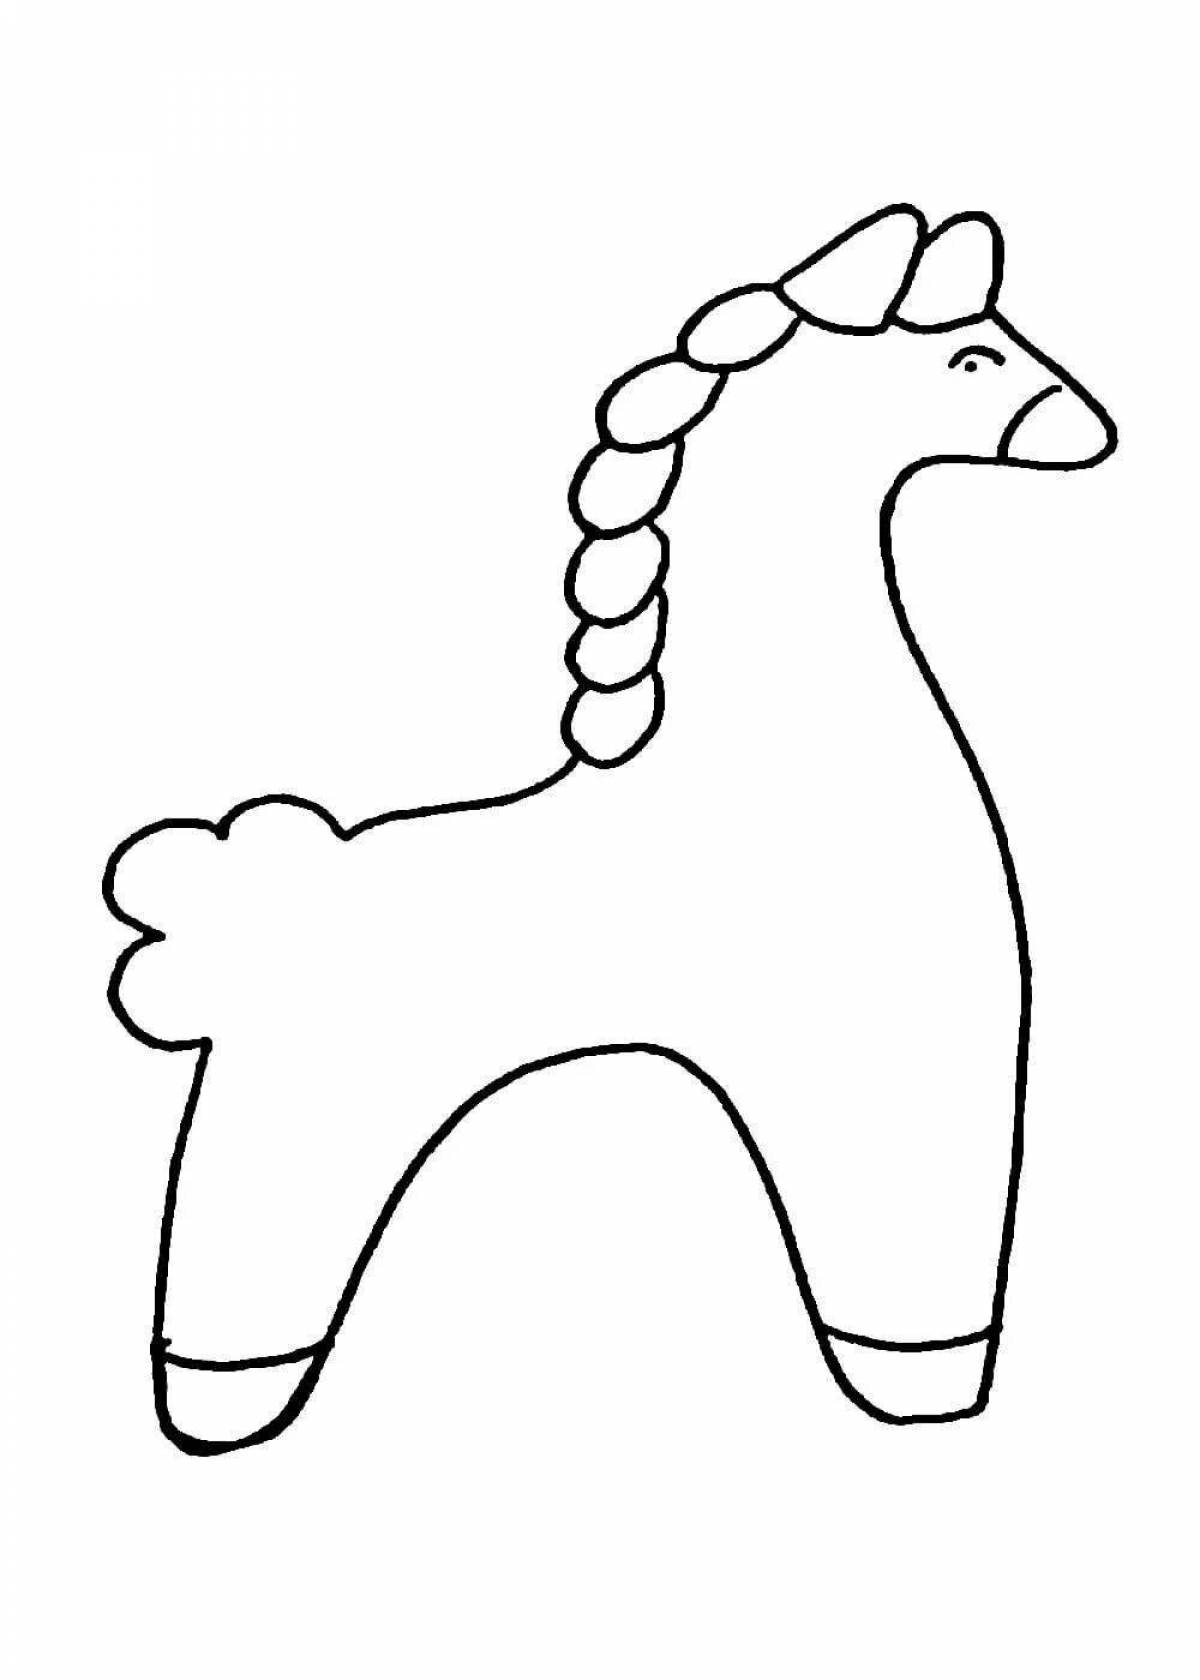 Exquisite Dymkovo horse coloring pages for kids